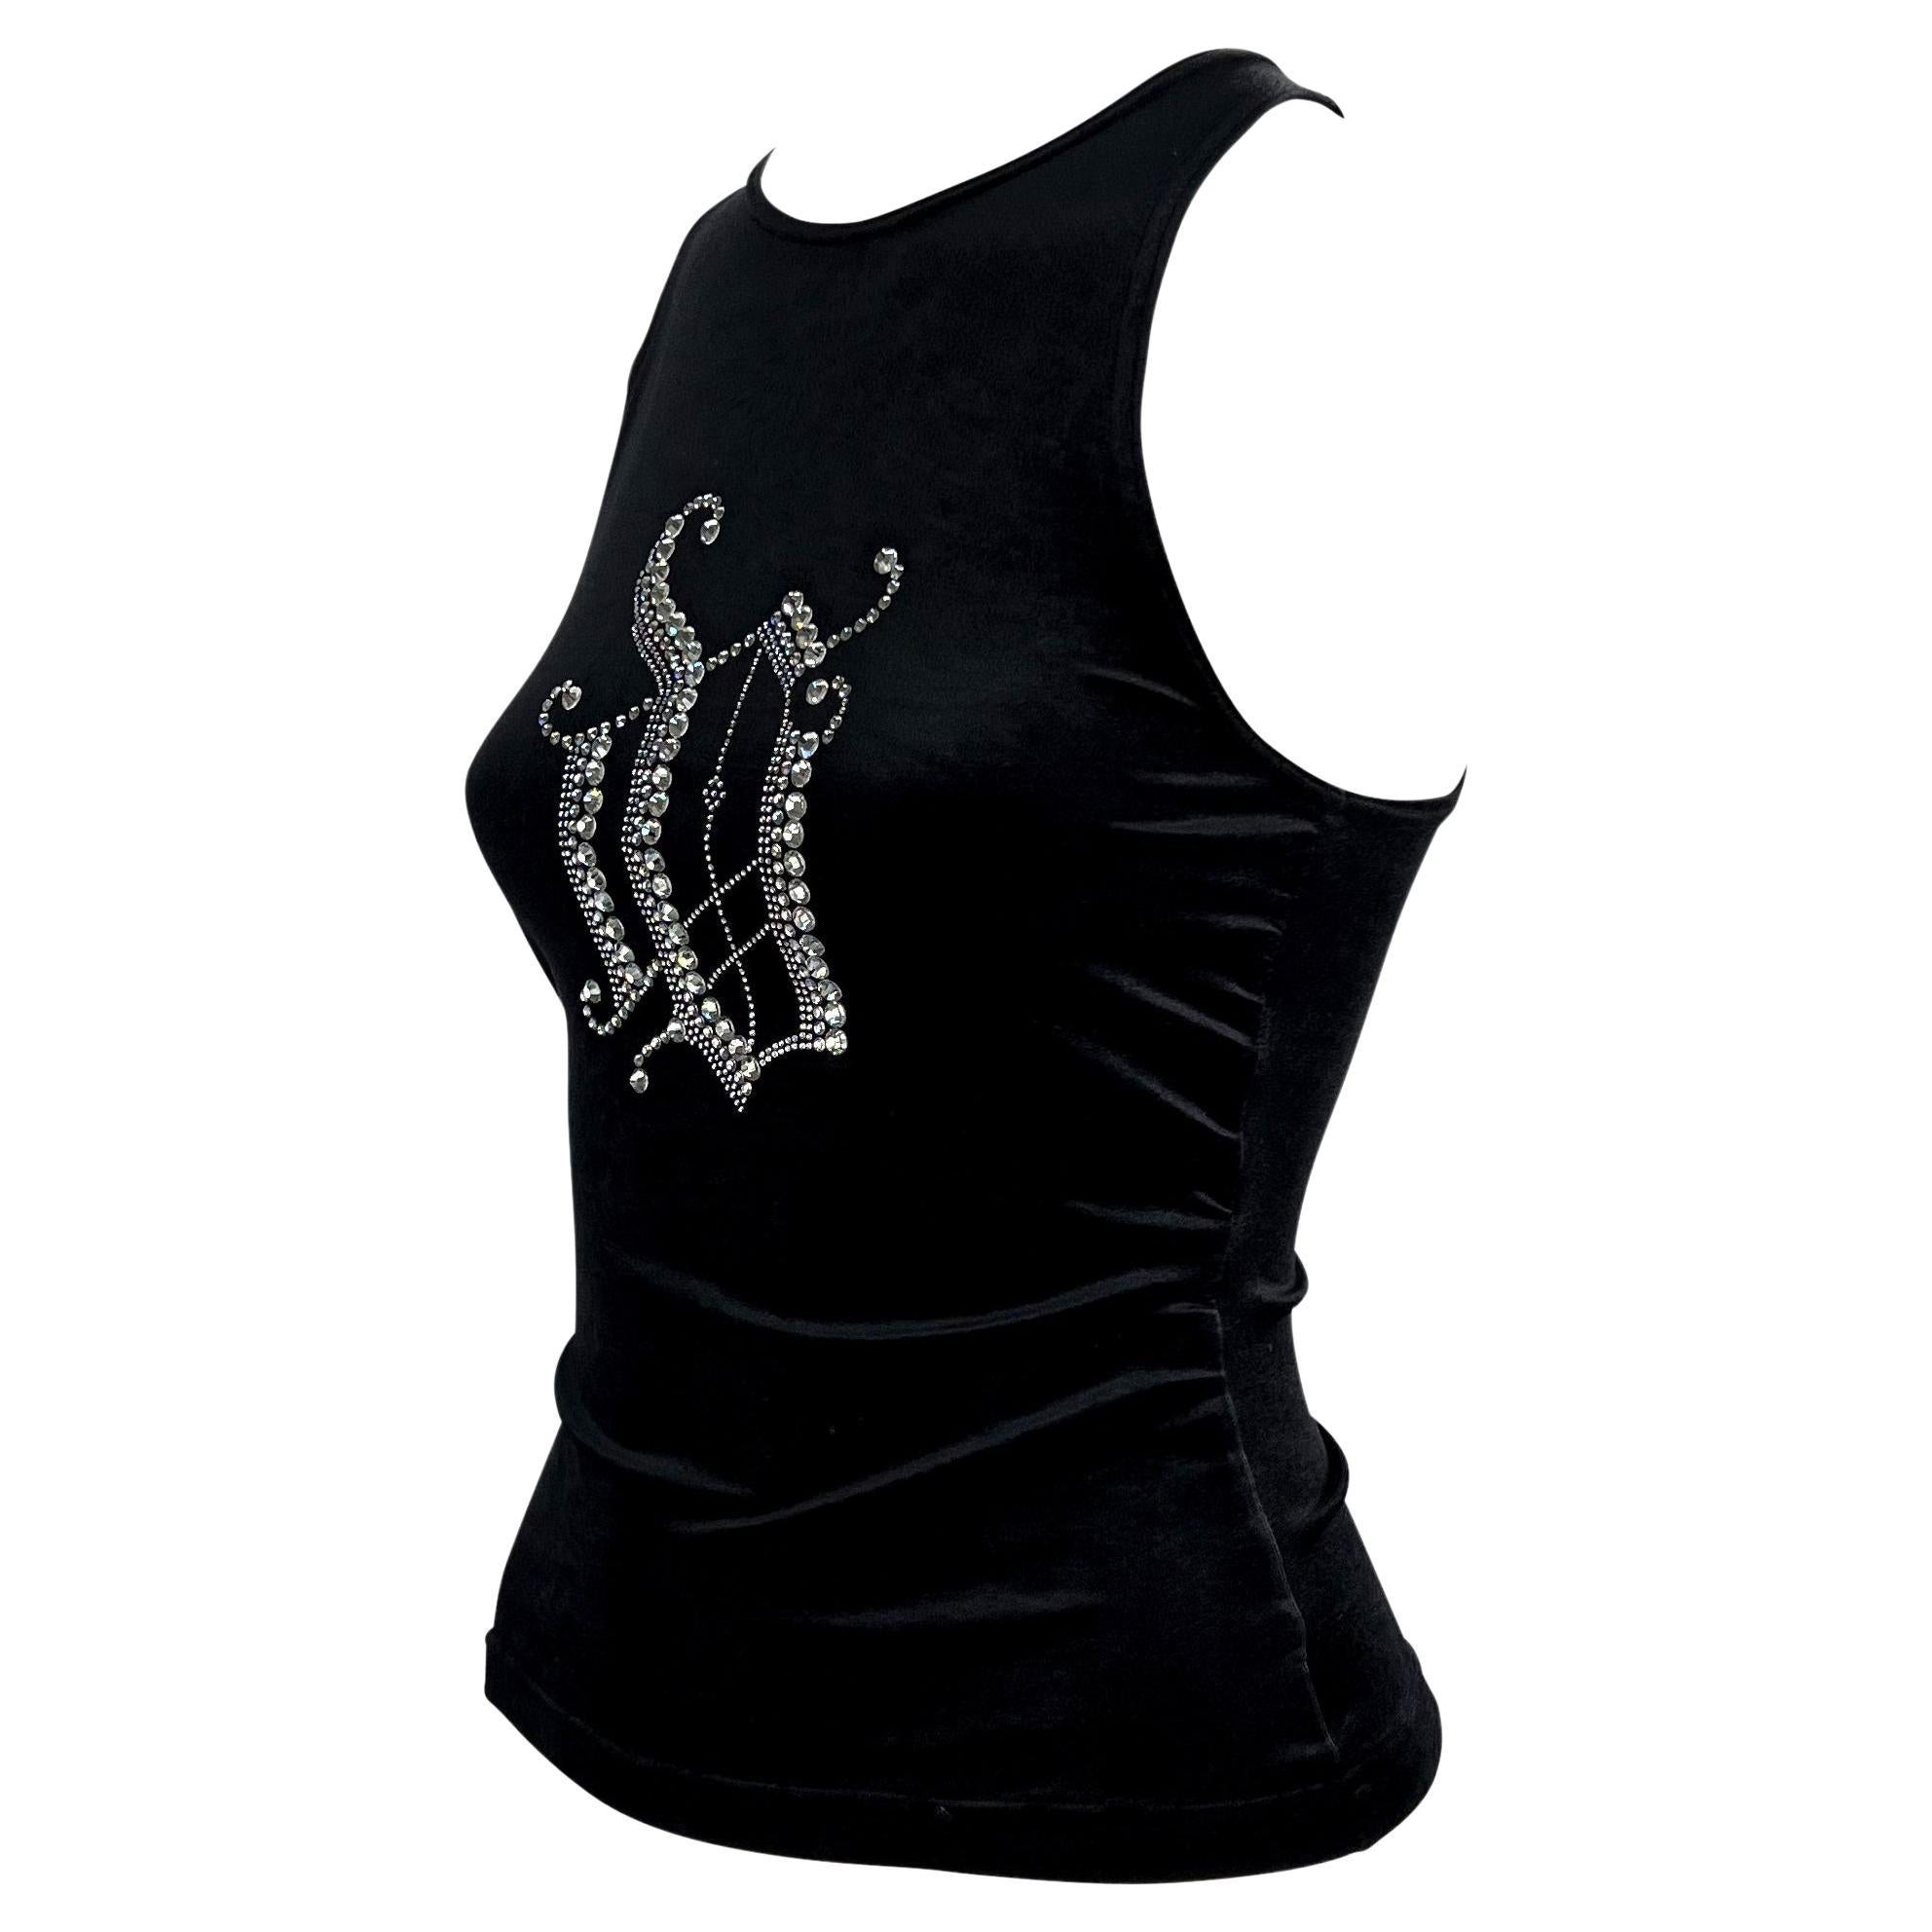 Presenting a black velvet stretch top designed by Donatella Versace in the early 2000s. The bust of the tank is embellished with clear crystal rhinestones in varied sizes arranged in an oversized 'DV' monogram. A Y2K dream, this tank is sure to